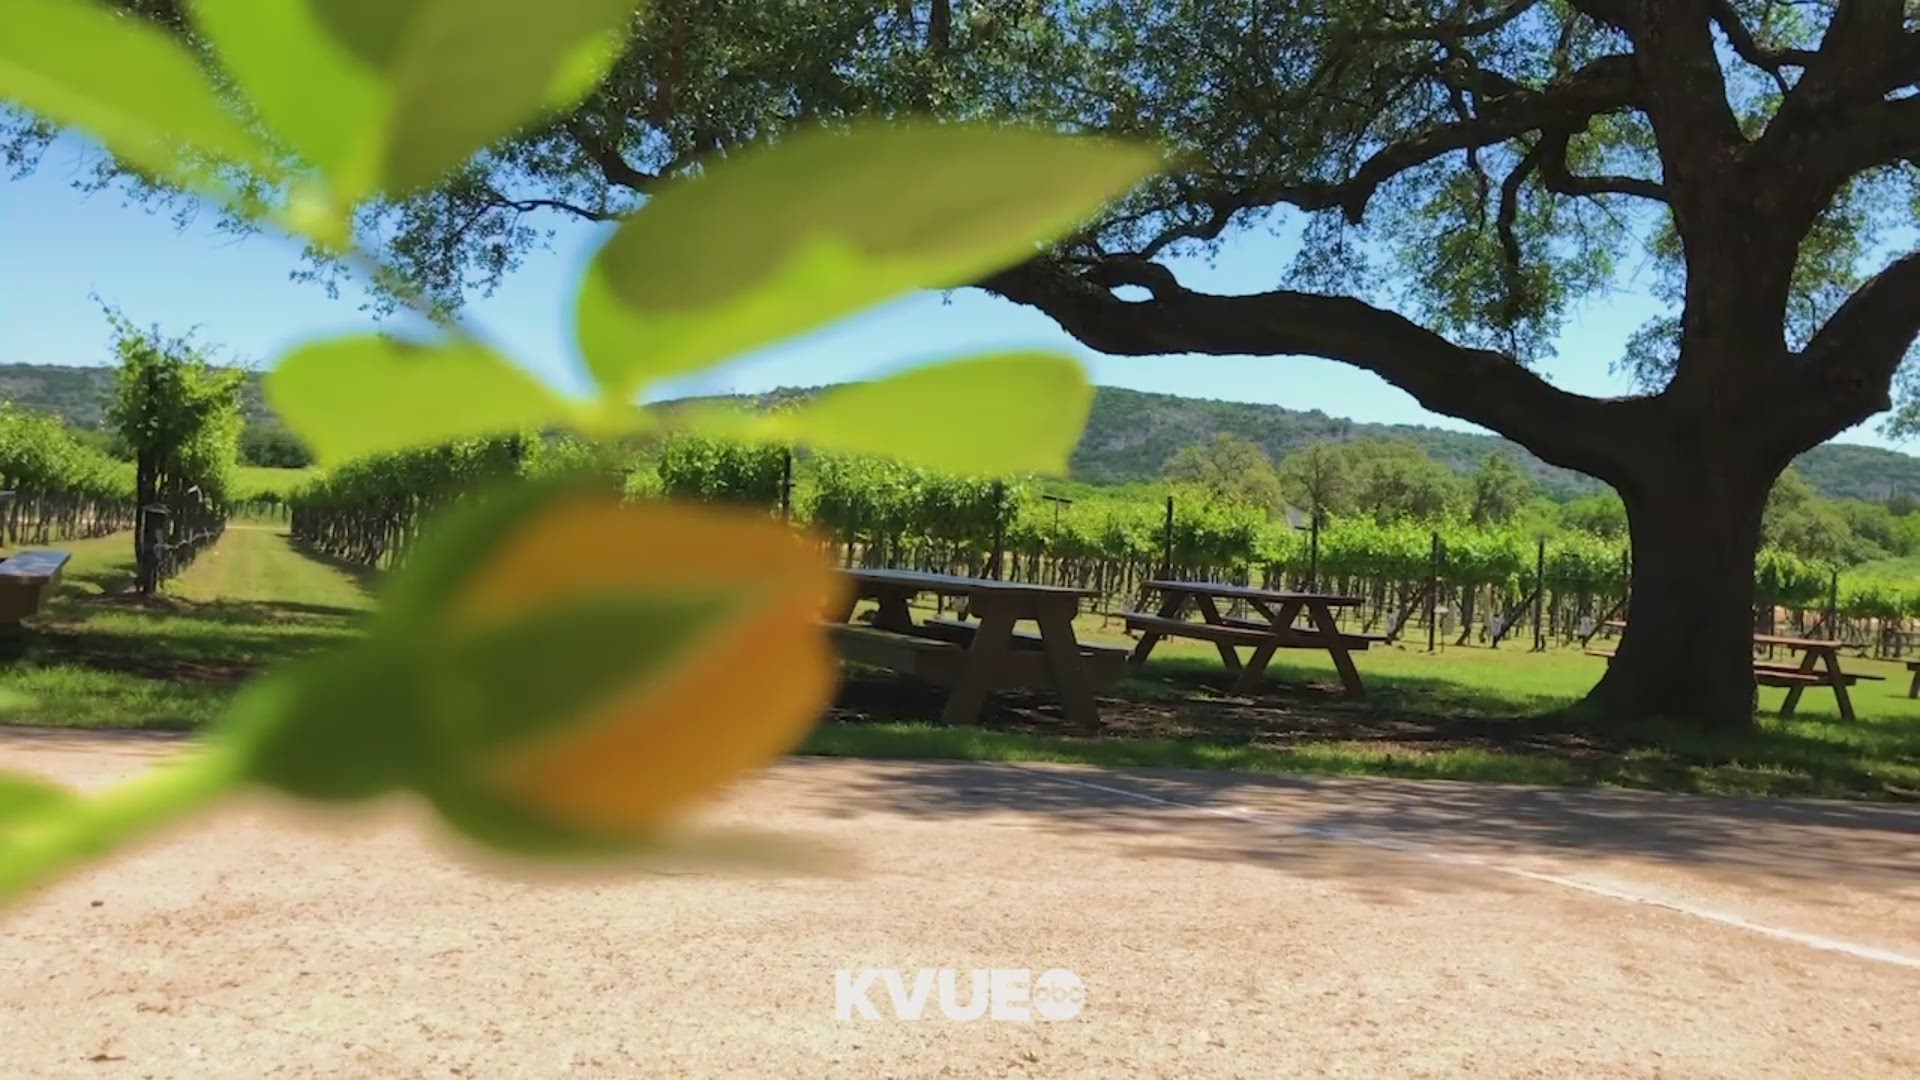 Pay a visit to this Texas Hill Country winery and reminisce about your favorite times.